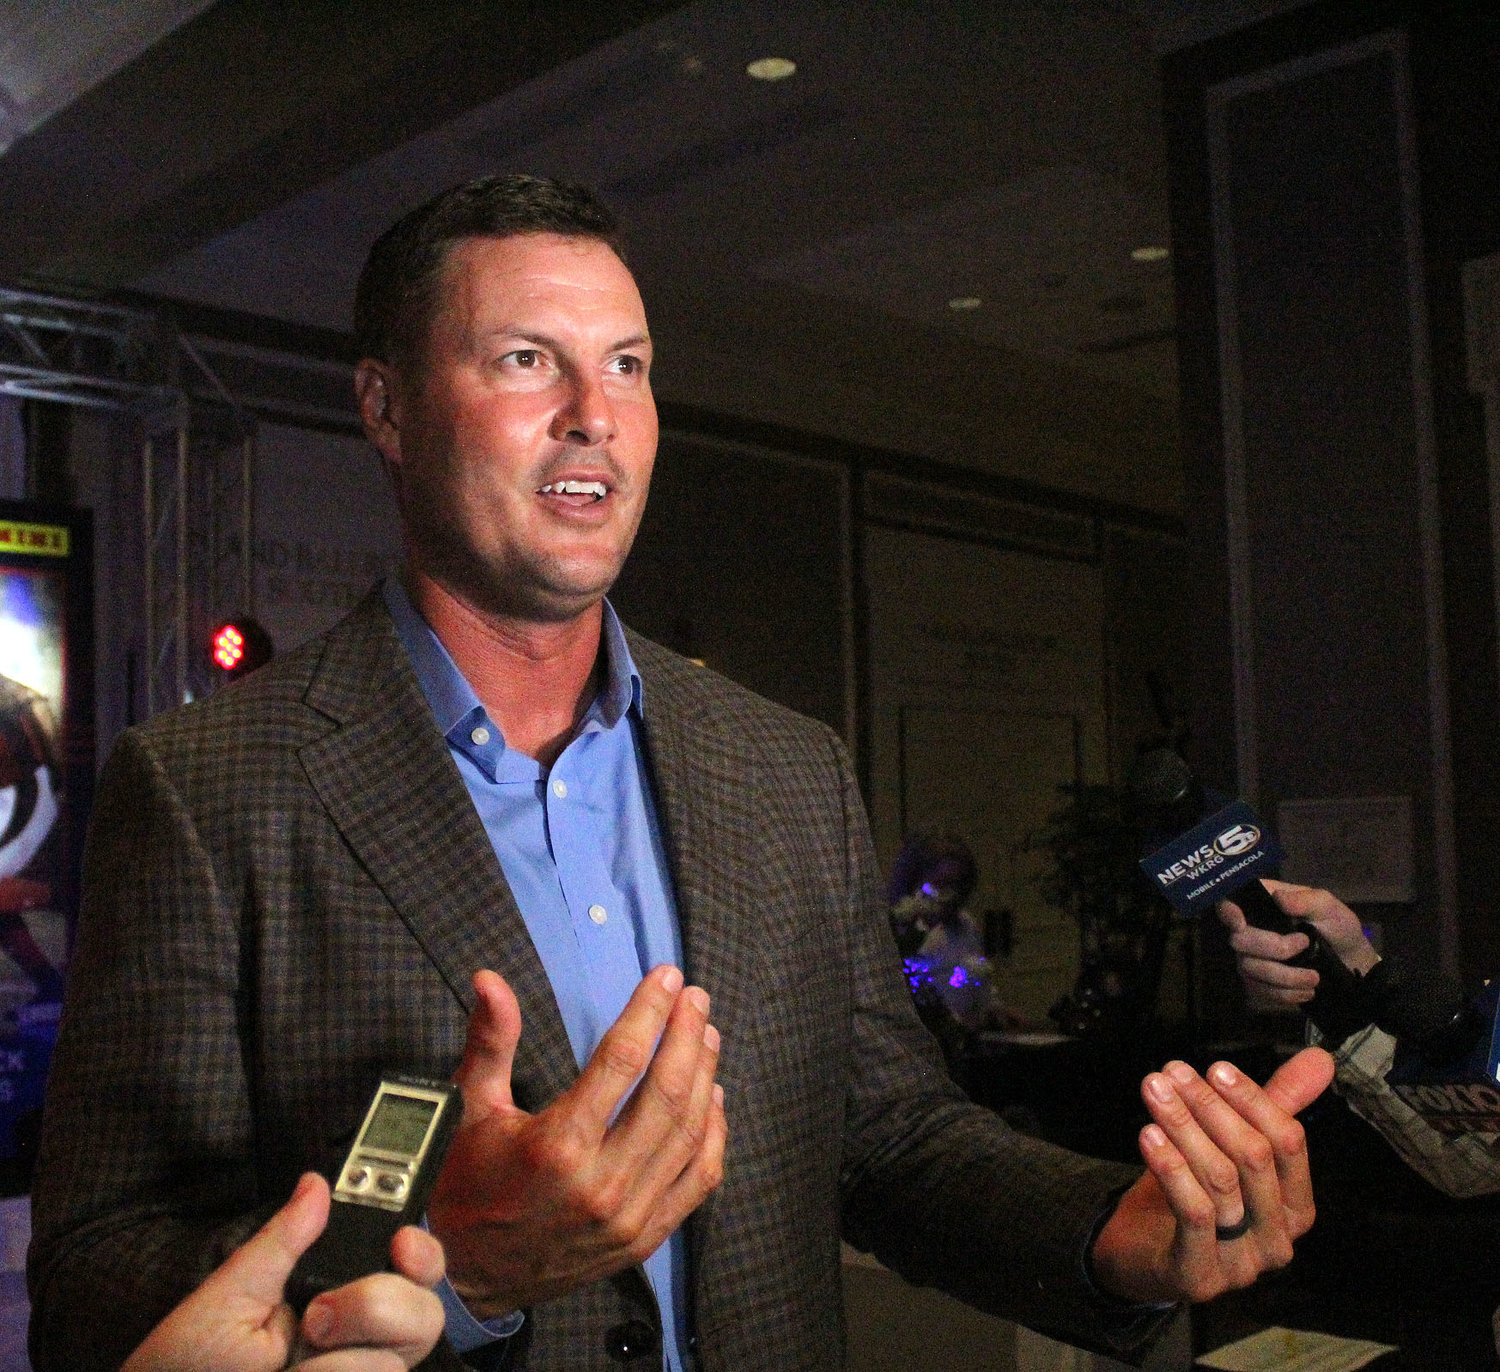 Philip Rivers meets with the media ahead of the Senior Bowl Hall of Fame induction ceremony at the Grand Hotel Golf Club & Spa in Point Clear Sunday night, June 26. The St. Michael Cardinals’ Head Football Coach was joined in the class by other NFL legends Kevin Faulk, Patrick Willis, Von Miller and Dak Prescott.